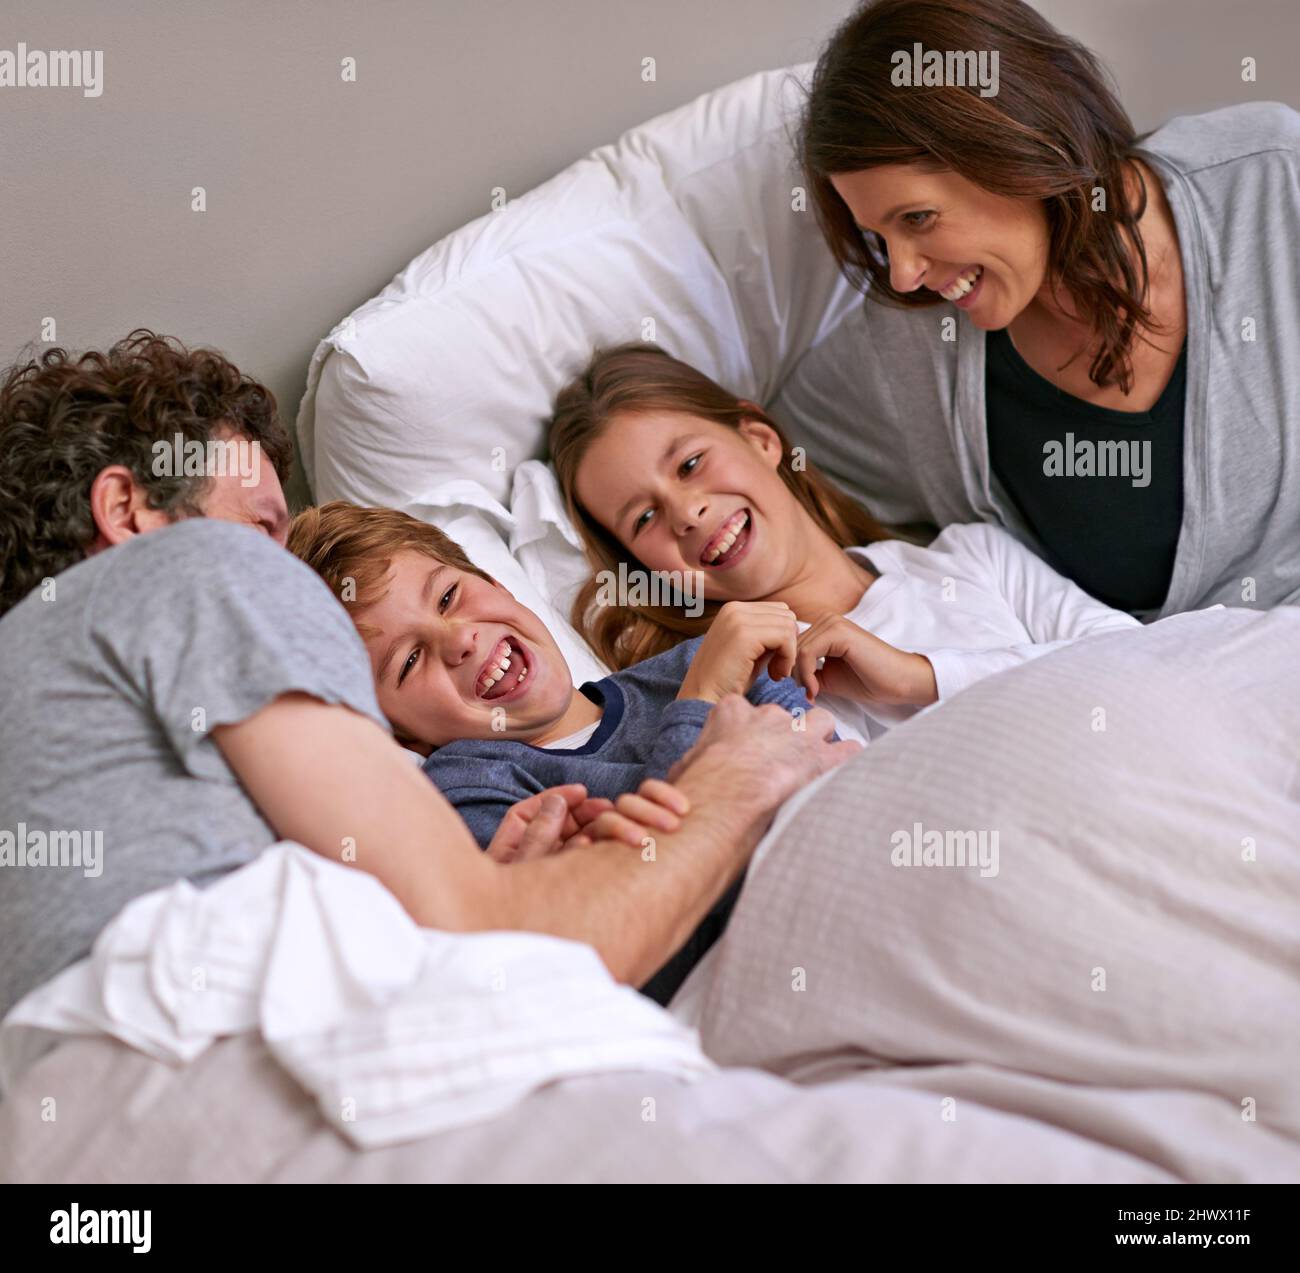 Family time. Shot of a happy family of four in the bedroom. Stock Photo